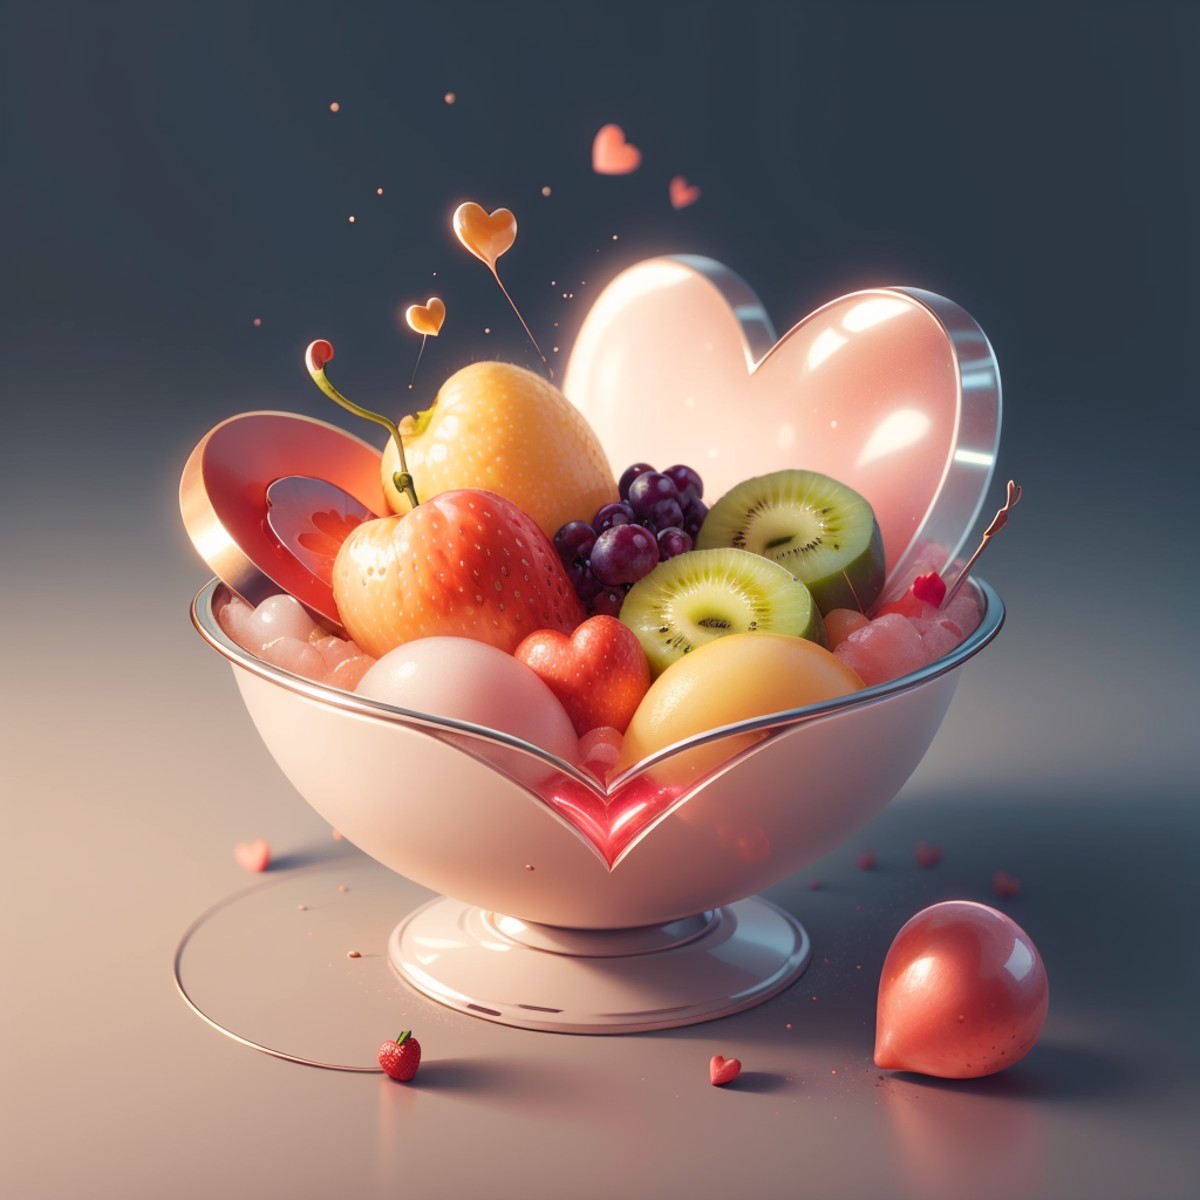 09629-13245-, cupidtech ,scifi, _bowl of fruits ,.png